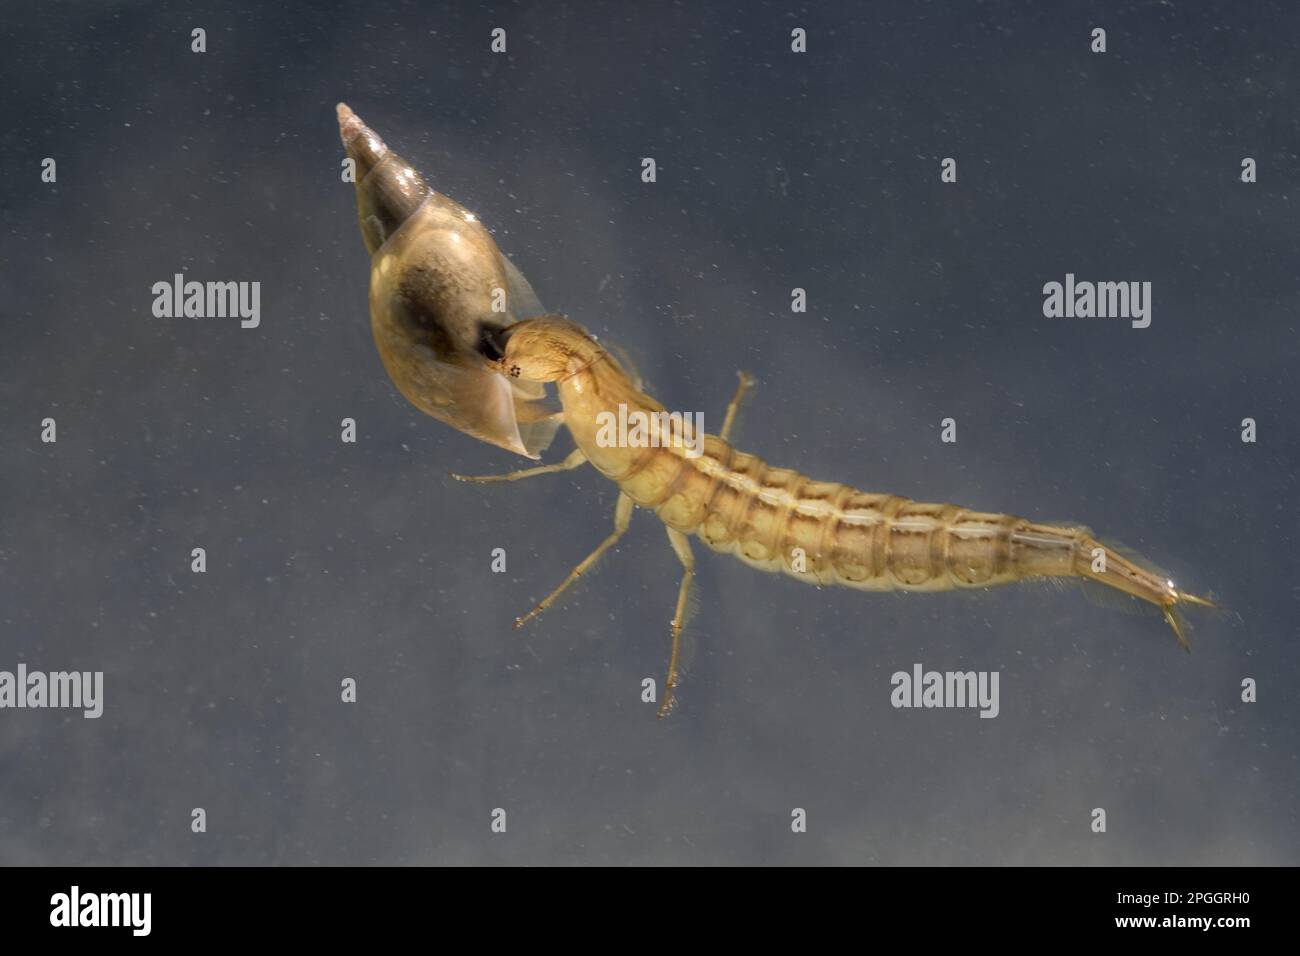 Larva of the large great diving beetle (Dytiscus marginalis), feeding on the prey of the water snail, swimming underwater in the garden pond Stock Photo